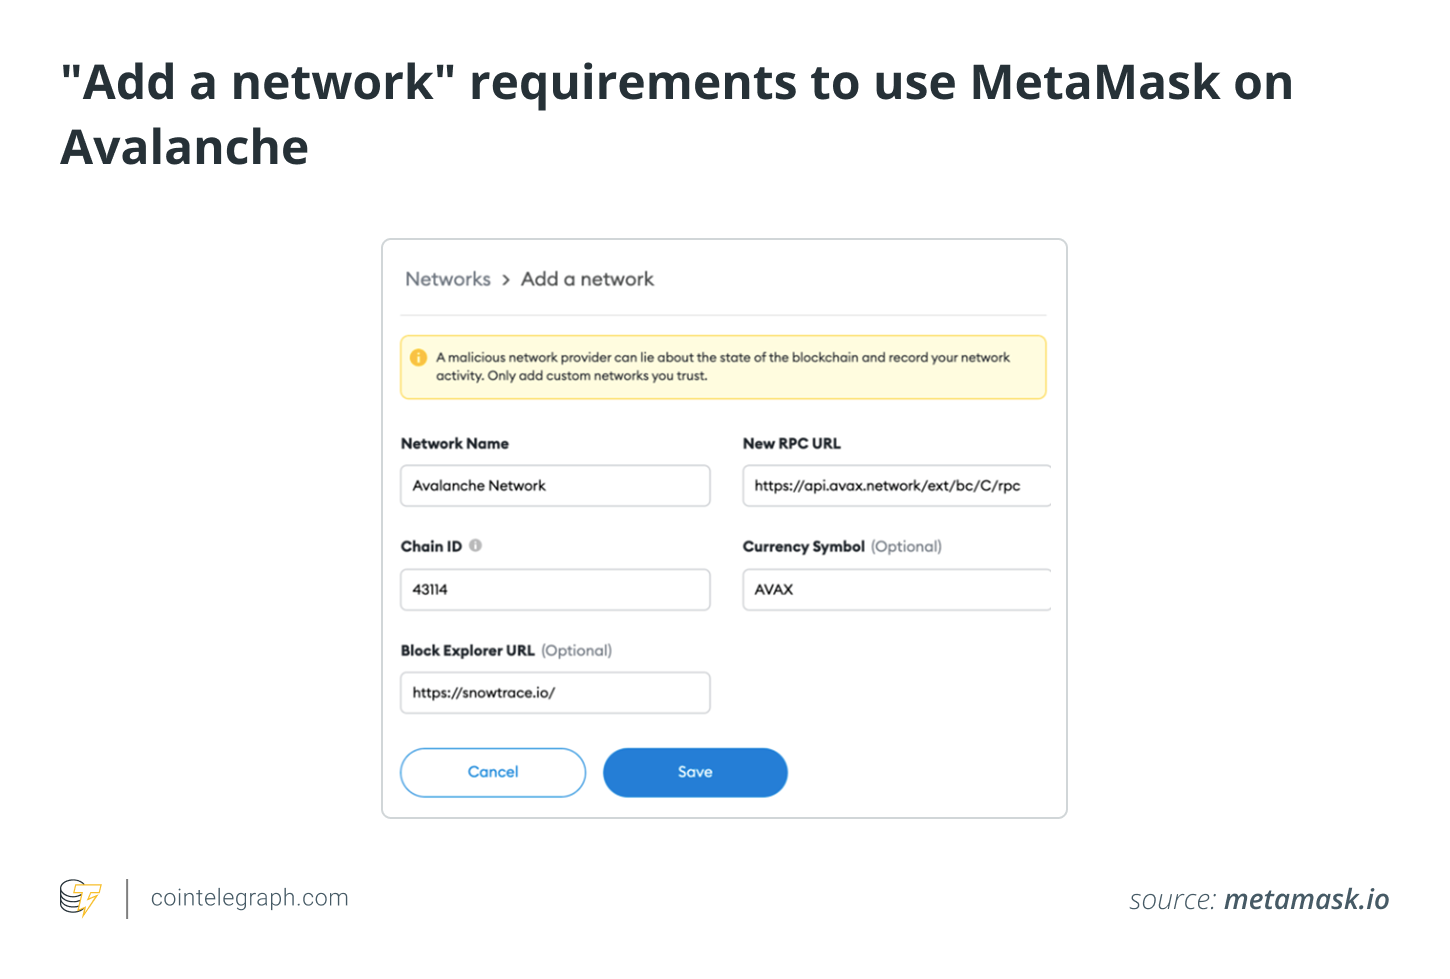 _Add a network_ requirements to use MetaMask on Avalanche